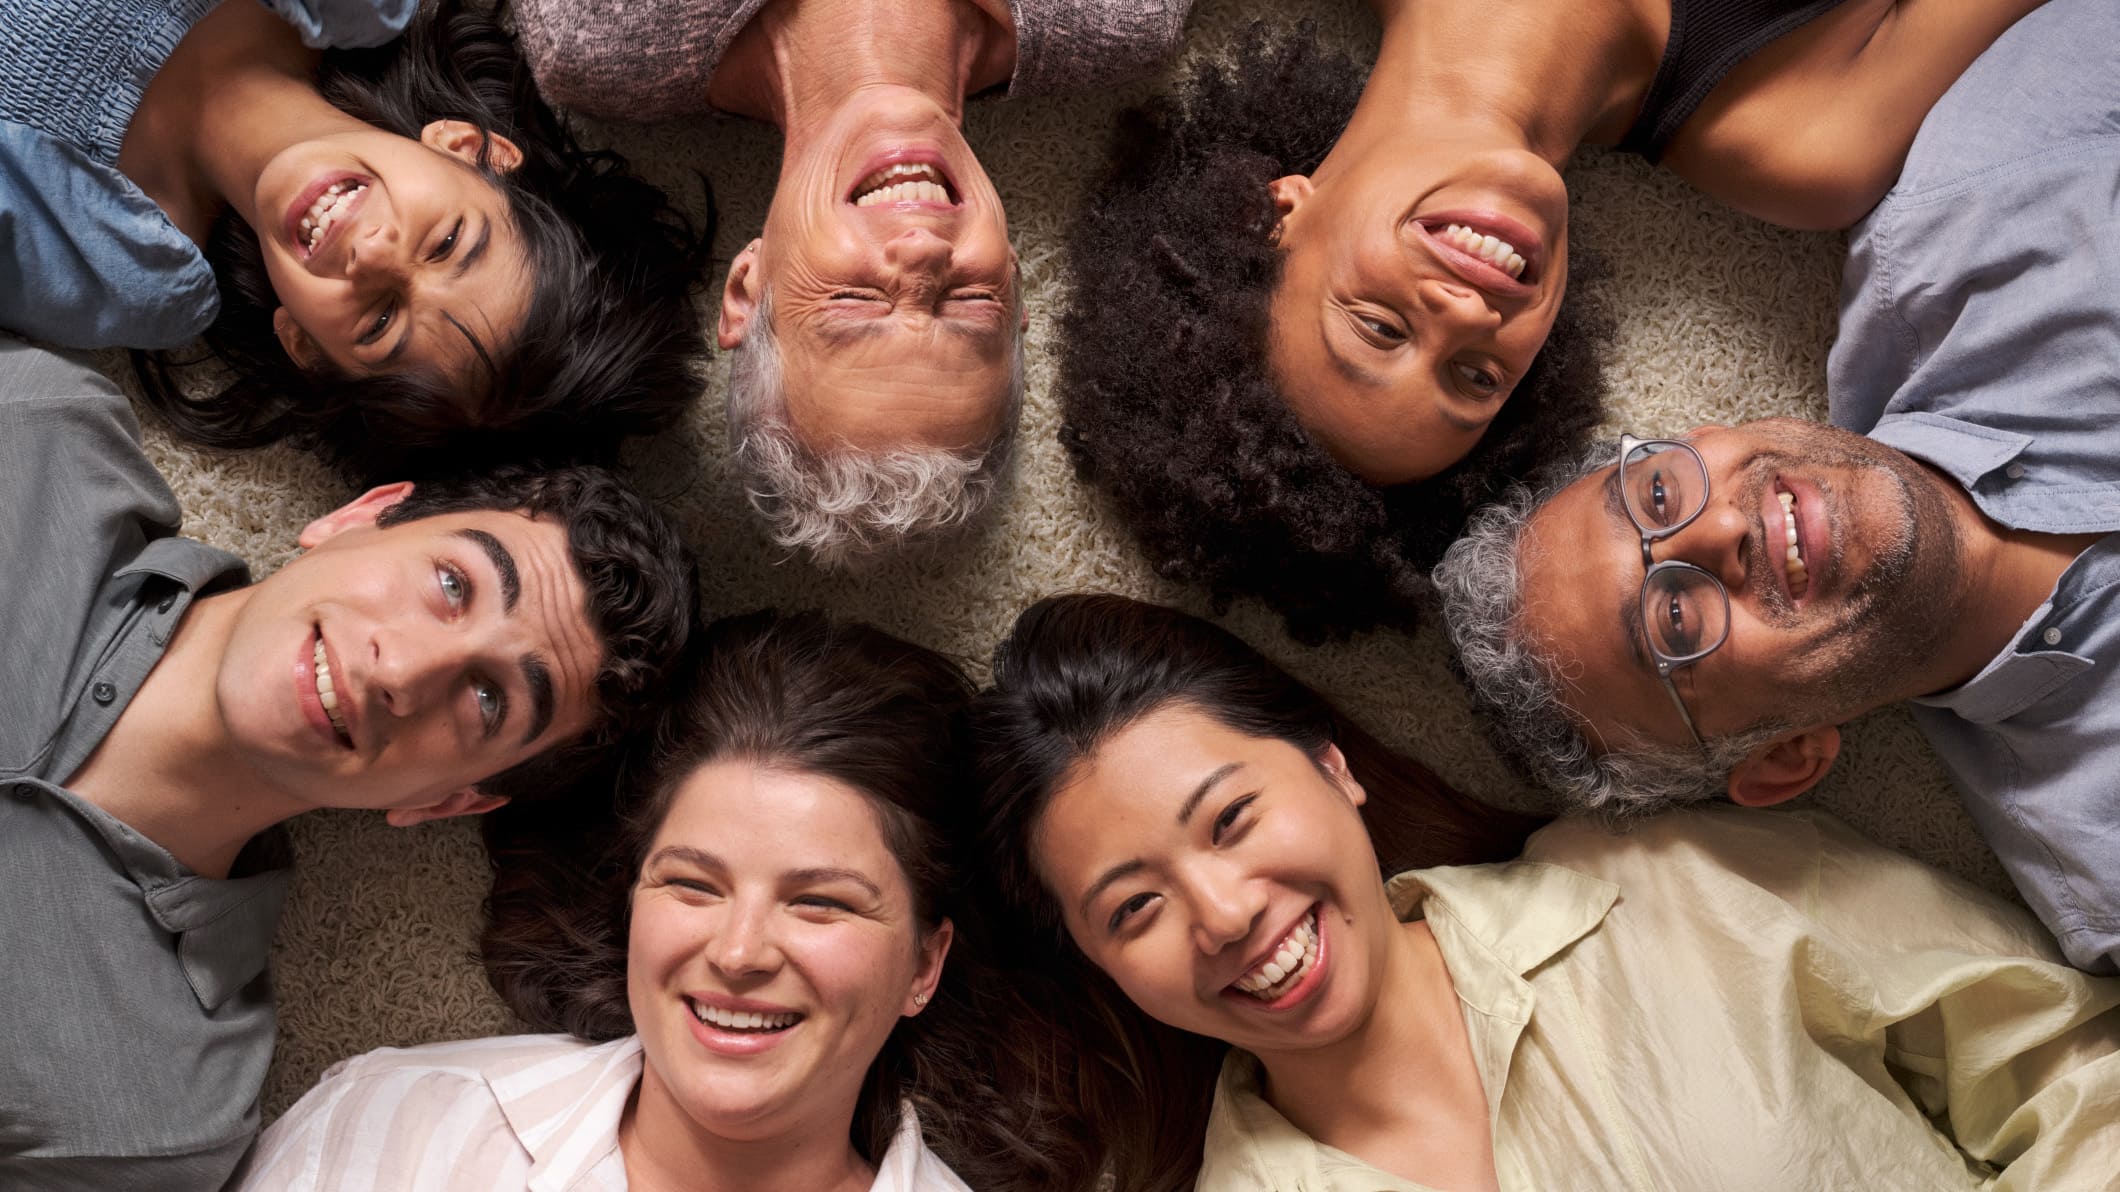 'A diverse group of people gathering with smiles, lying down and looking up.'